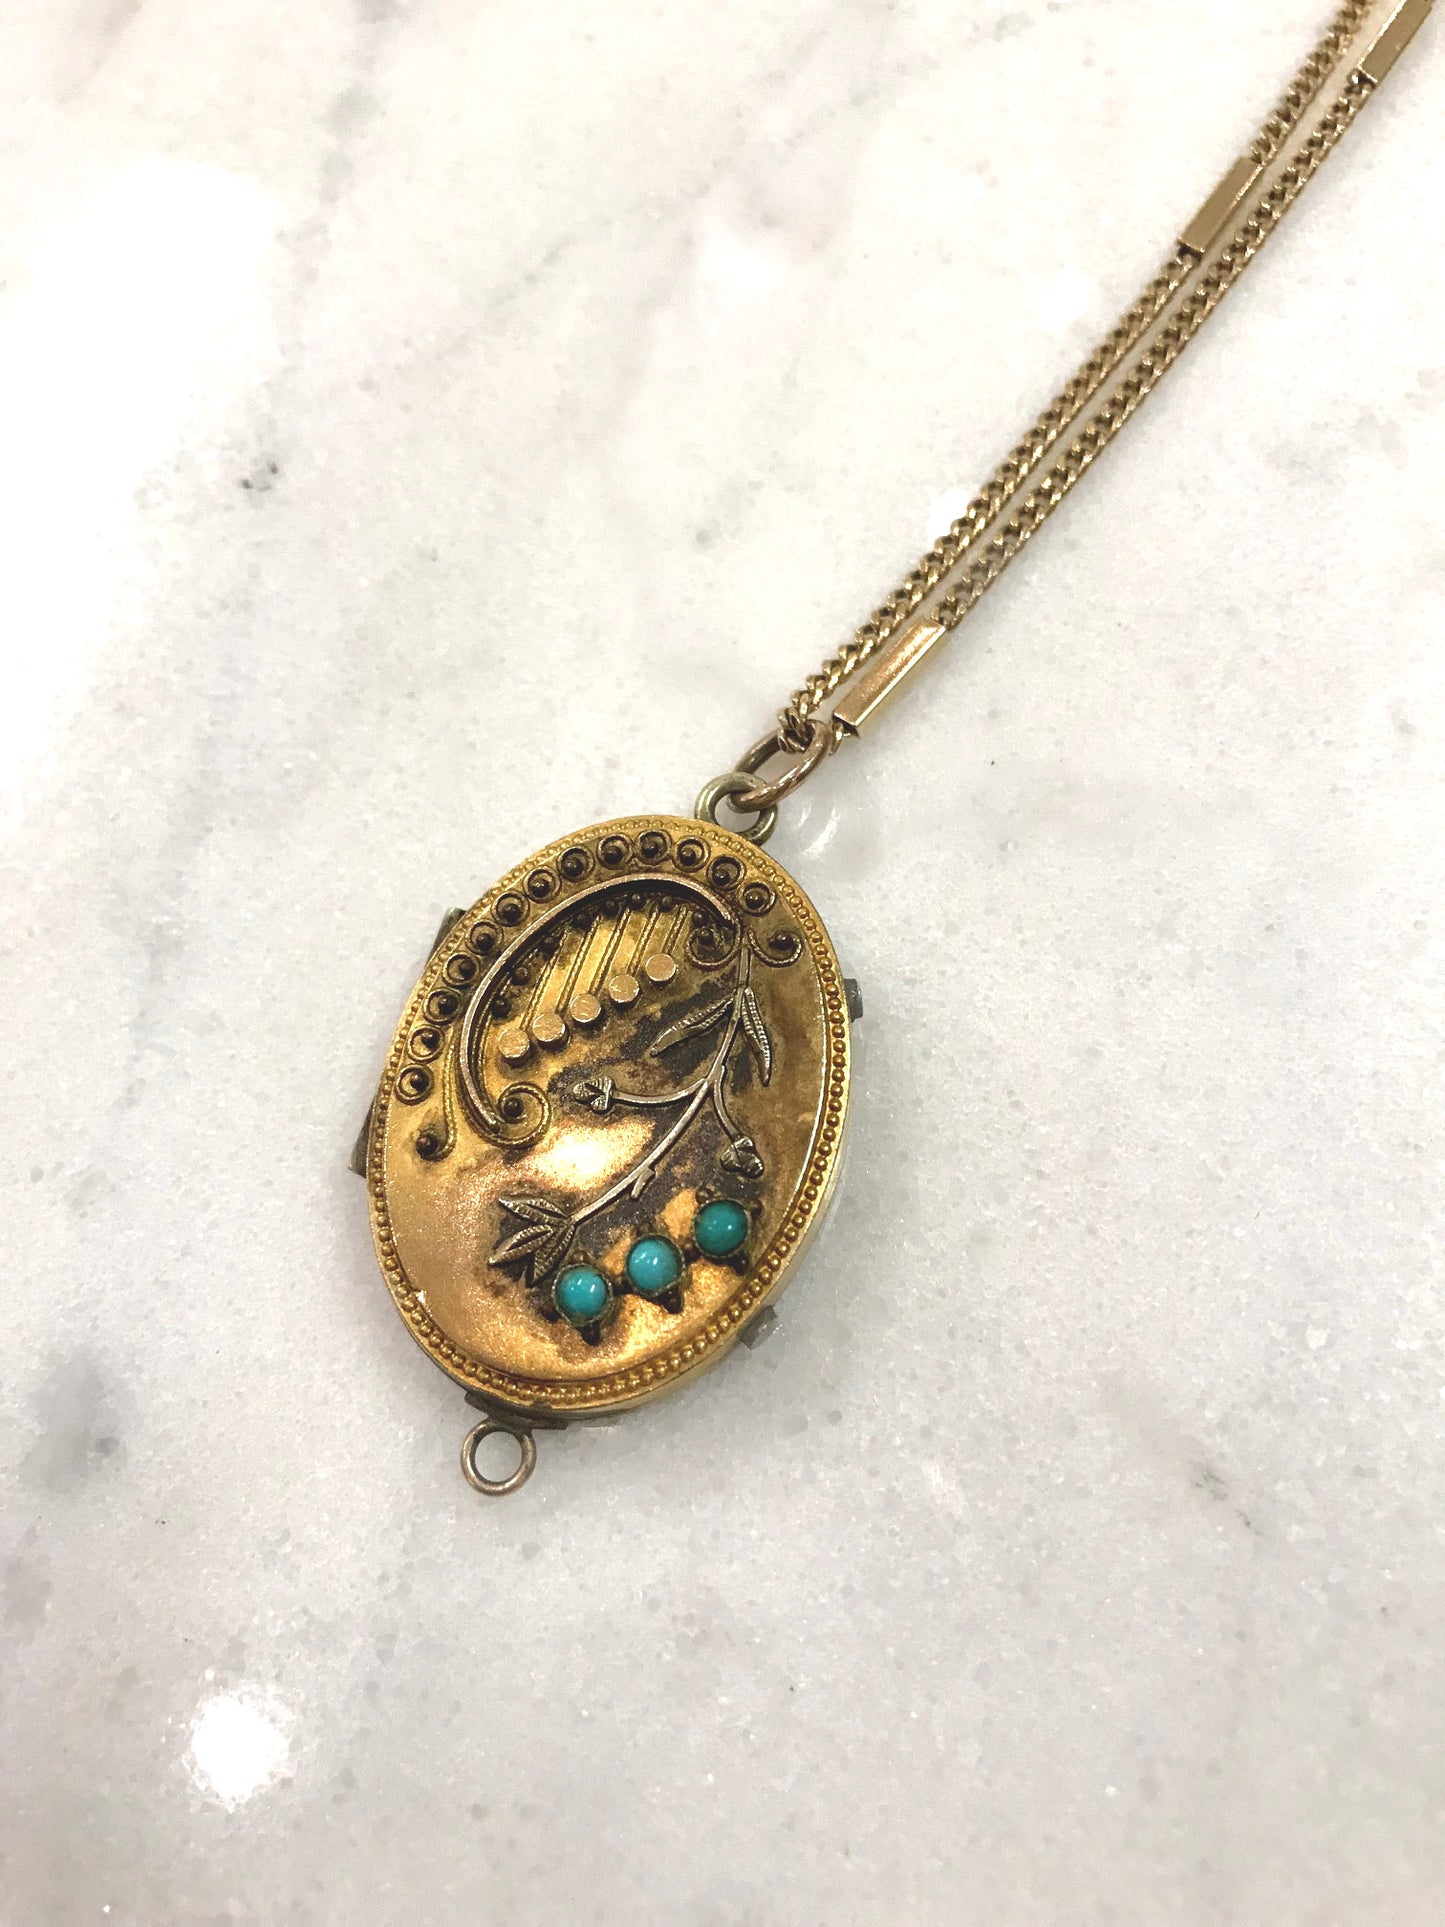 Victorian Arts & Crafts Period GF Locket with Turquoise